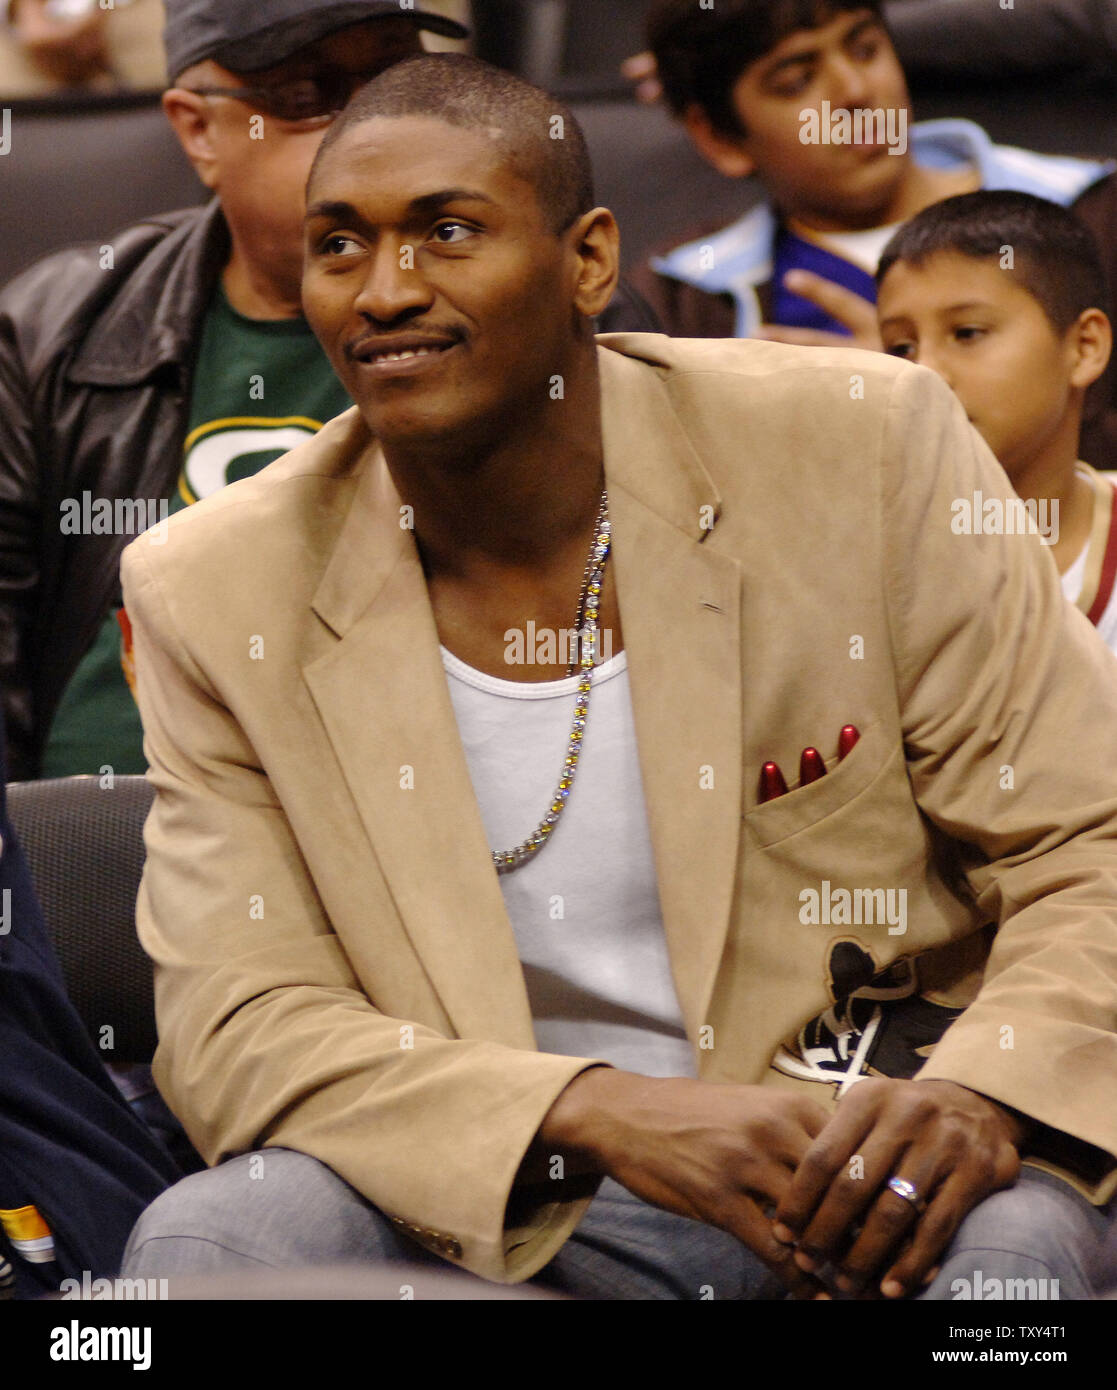 Indiana Pacers' Ron Artest watches the Los Angeles Lakers' NBA basketball game against the Cleveland Cavaliers in Los Angeles on January 12, 2006.  Artest, the 2003-04 NBA defensive player of the year, was averaging 19.4 points when he voiced his desire to be traded last month. He later recanted that statement, but team president Larry Bird and Walsh have said they are no longer interested in having him play for Indiana. Artest hasn't played in a game since Dec. 6.  (UPI Photo/Jim Ruymen) Stock Photo